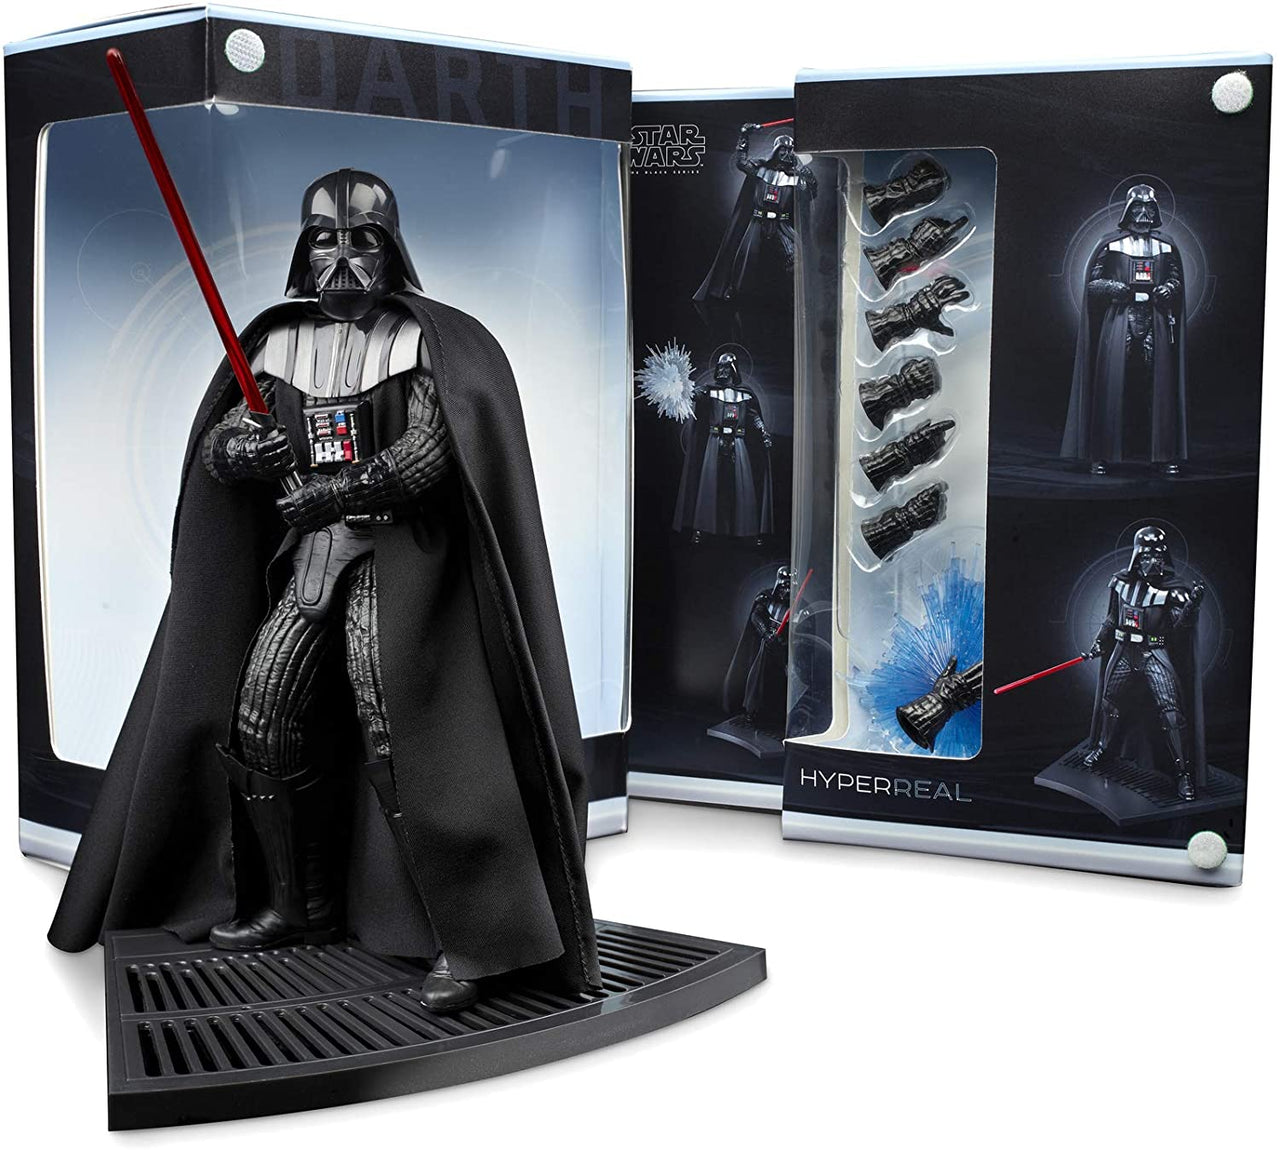 Star Wars The Black Series Hyperreal Episode V The Empire Strikes Back 8"-Scale Darth Vader Action Figure